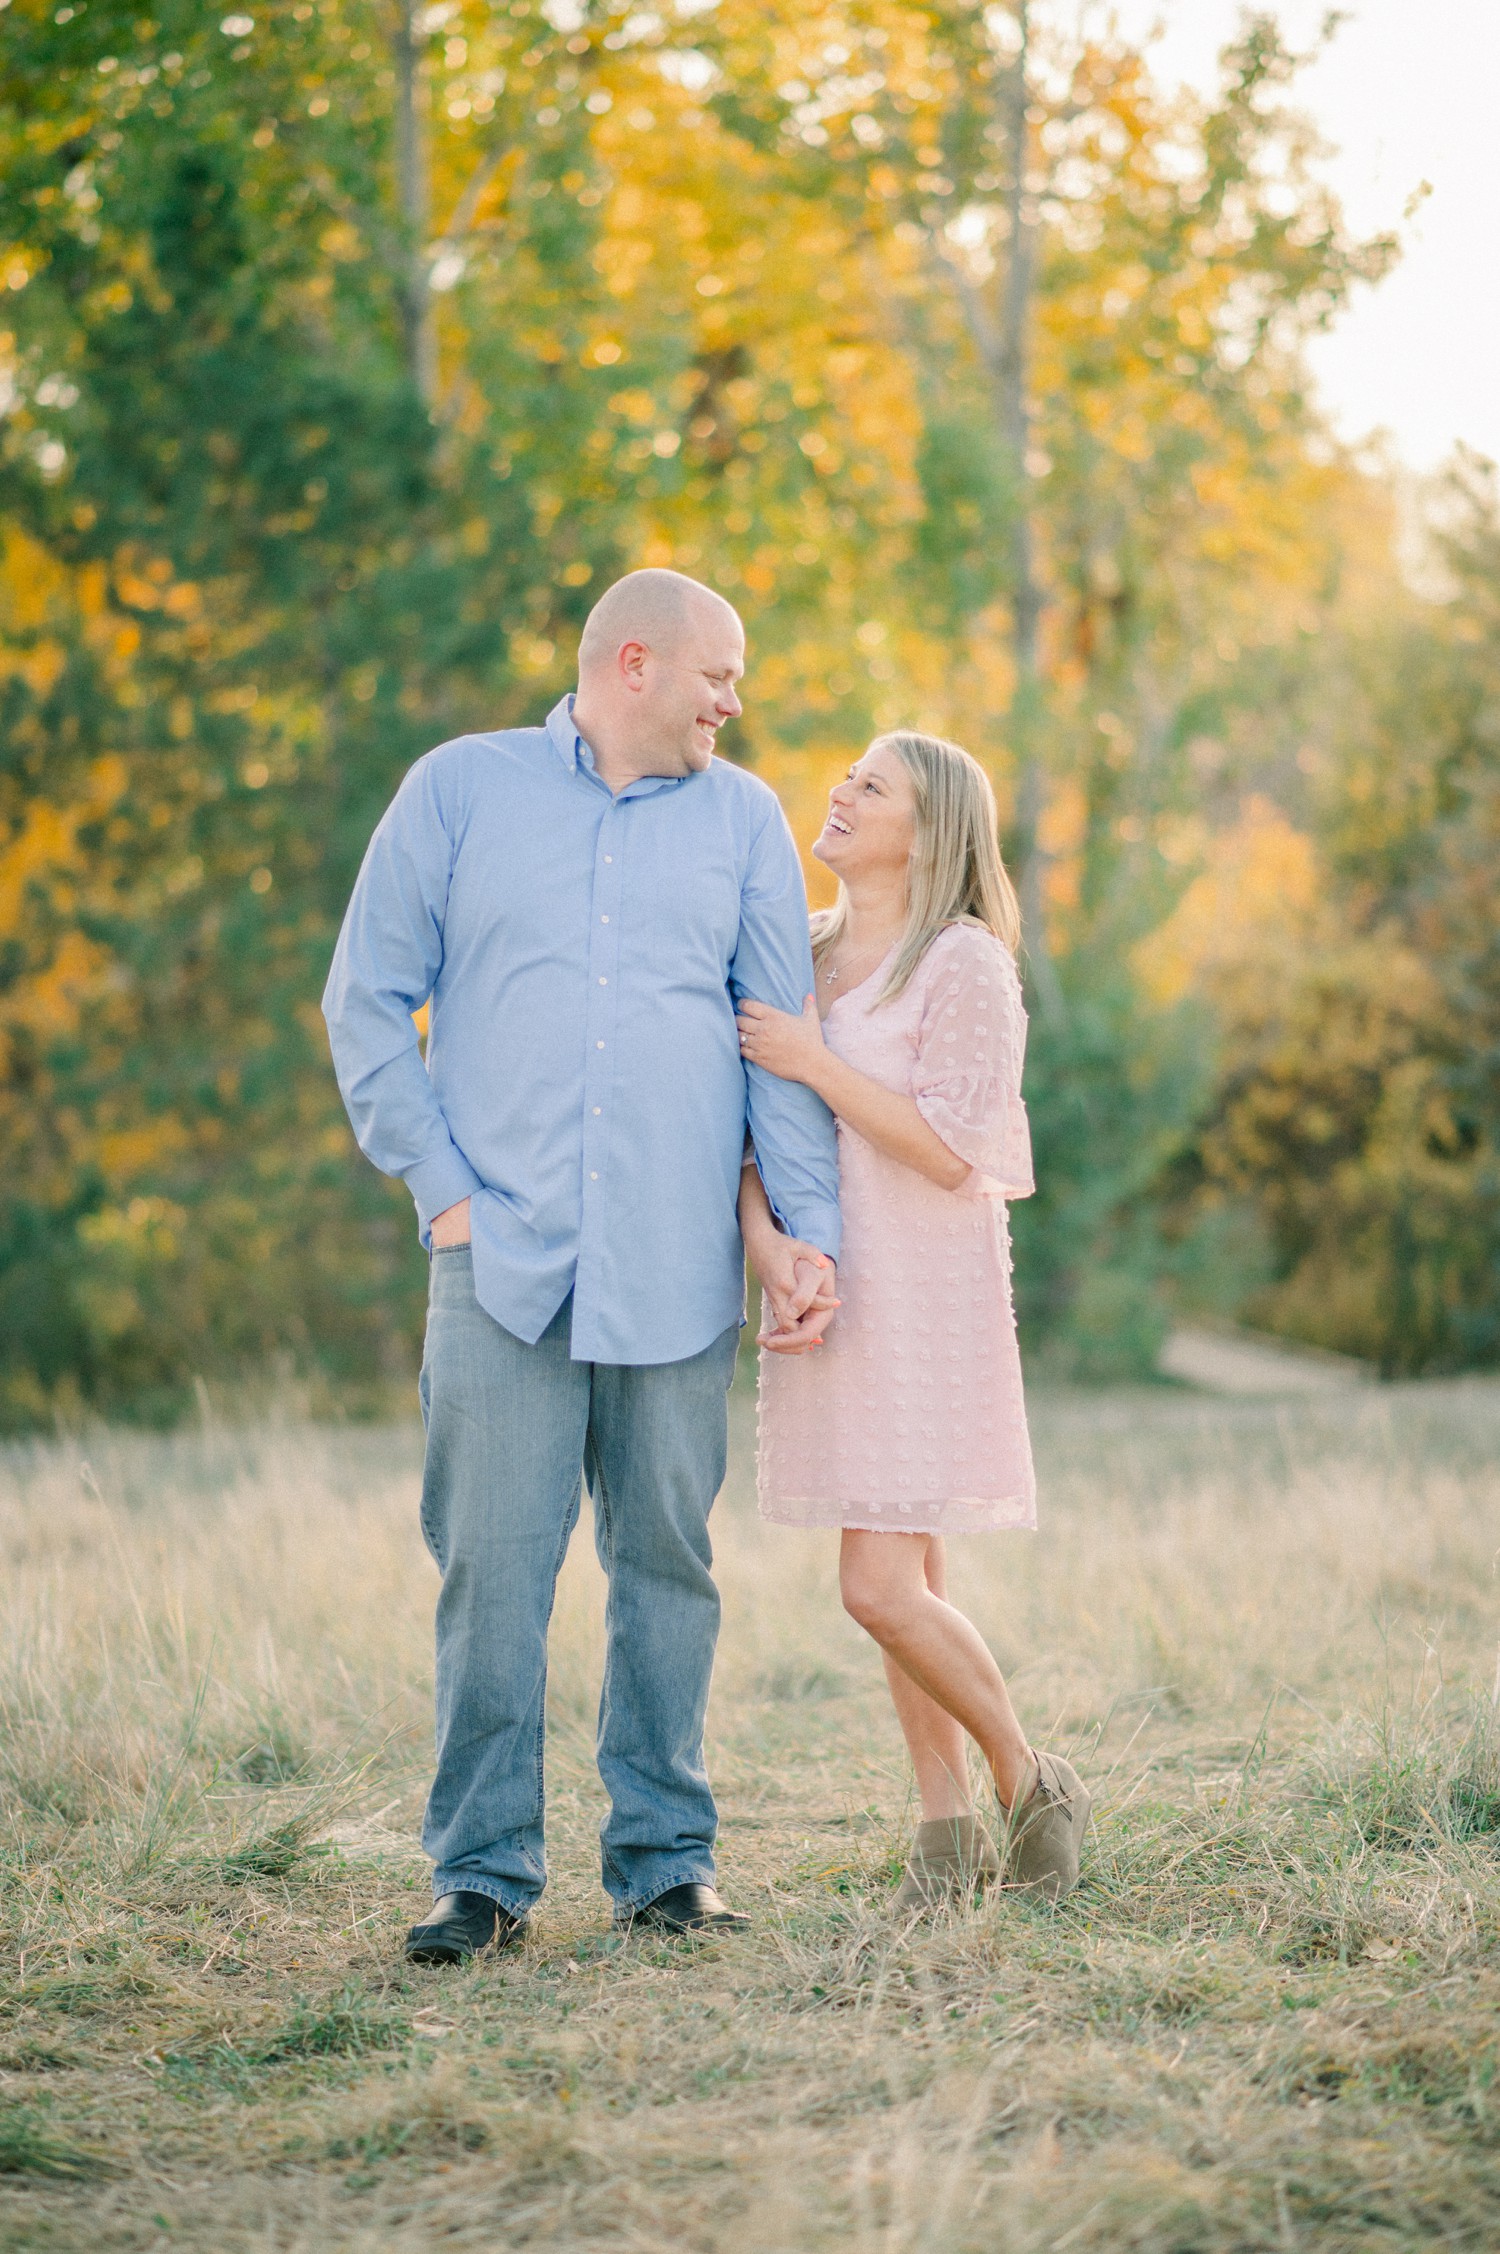 Denver engagement session with fall colors.